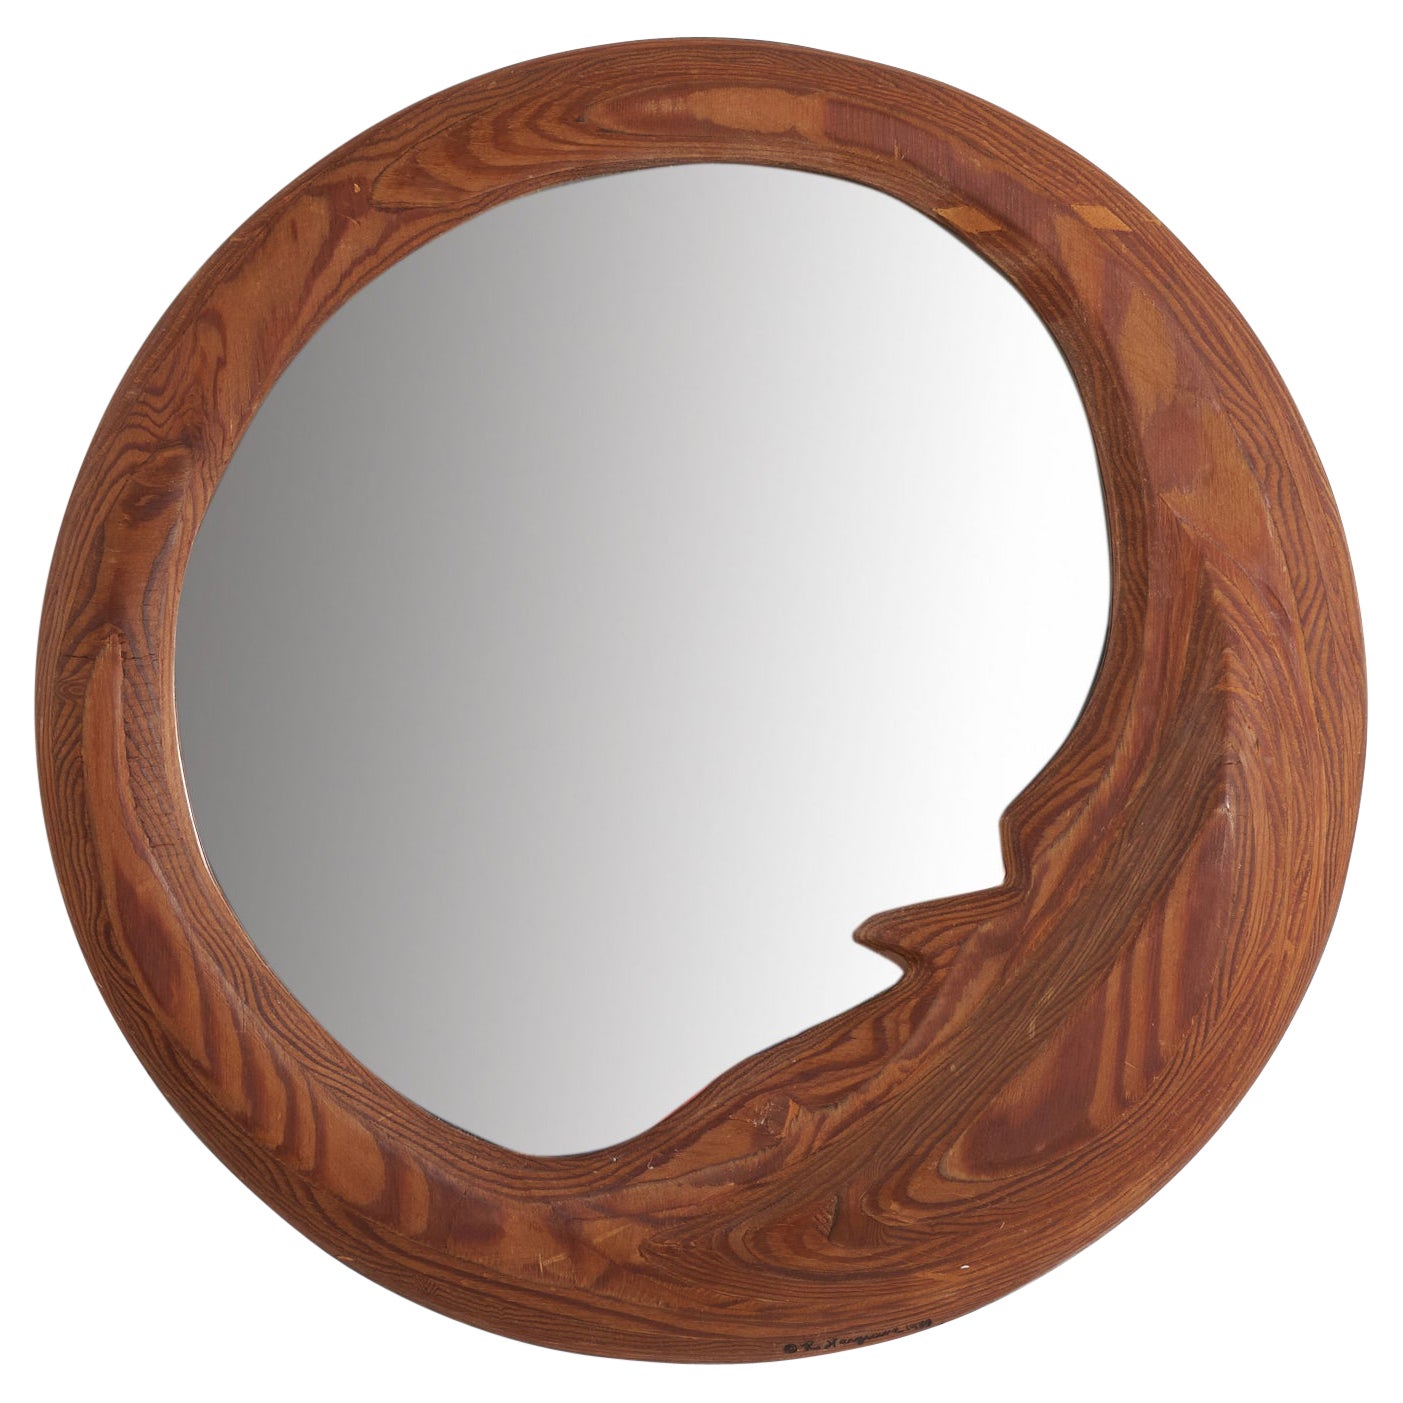 American Designer, Wall Mirror, Pine Wood, Mirror, United States, 1980 For Sale